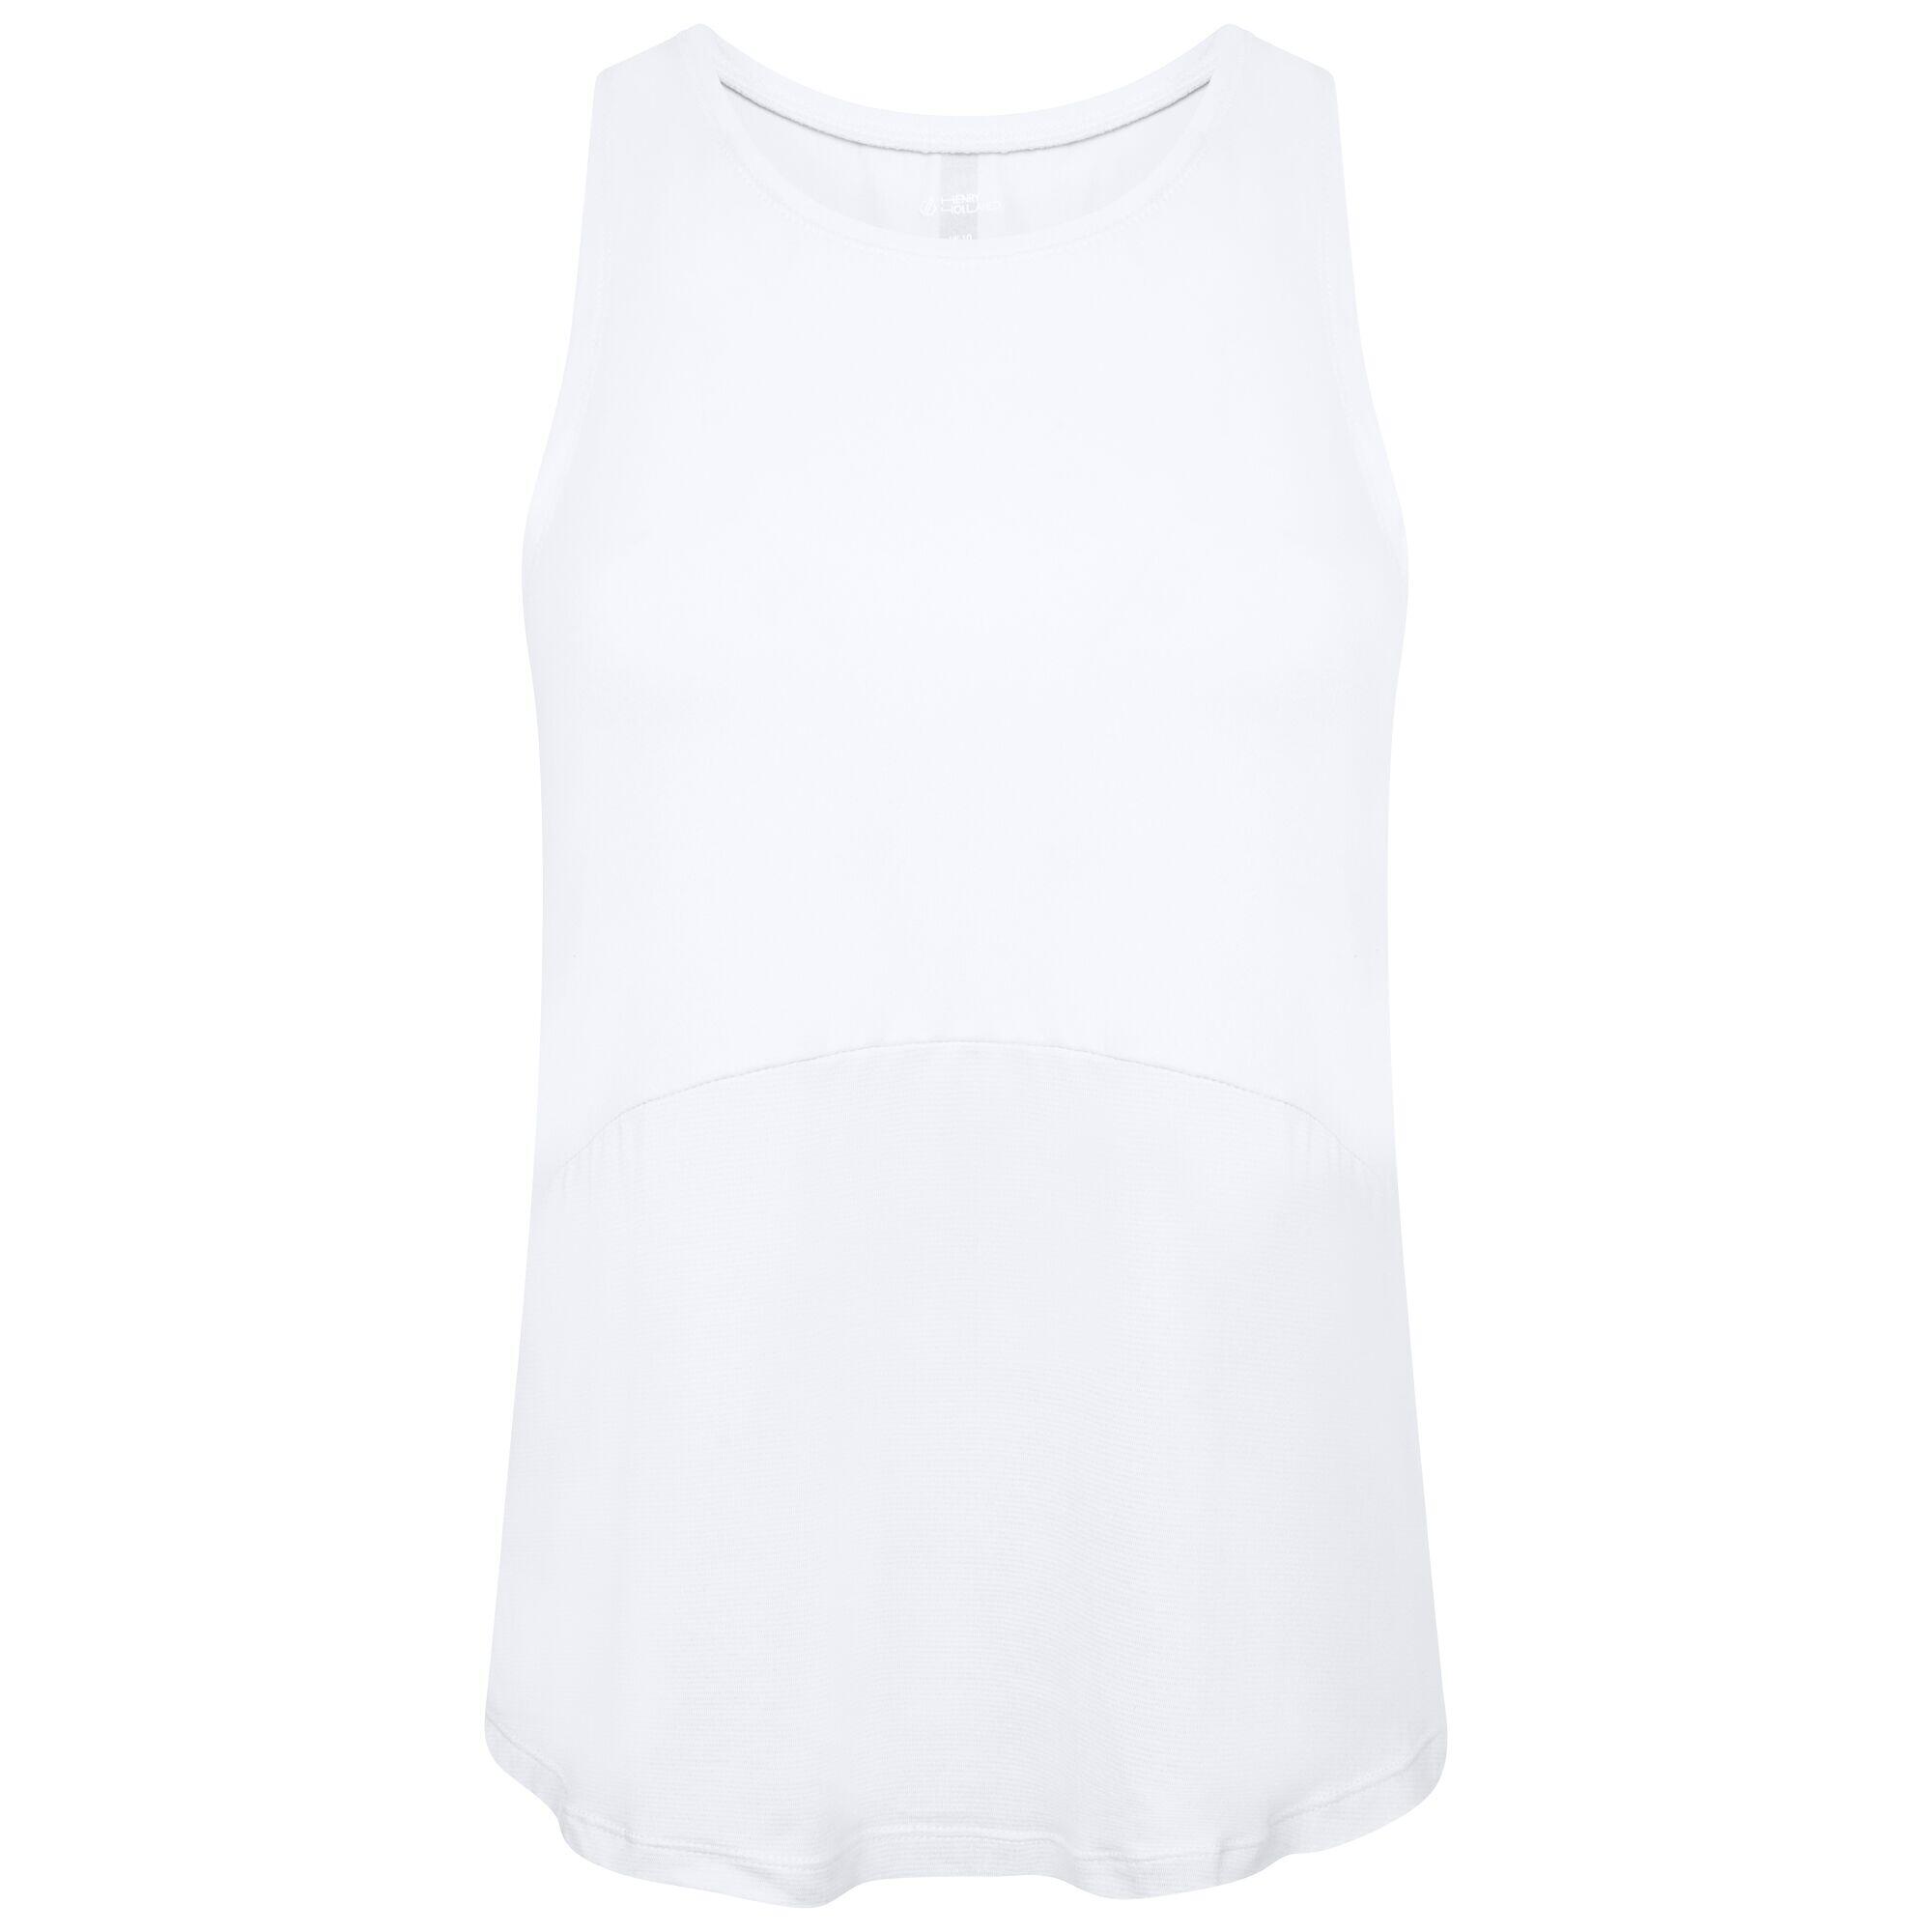 DARE 2B Henry Holland Cut Loose Womens Gym Vest - White